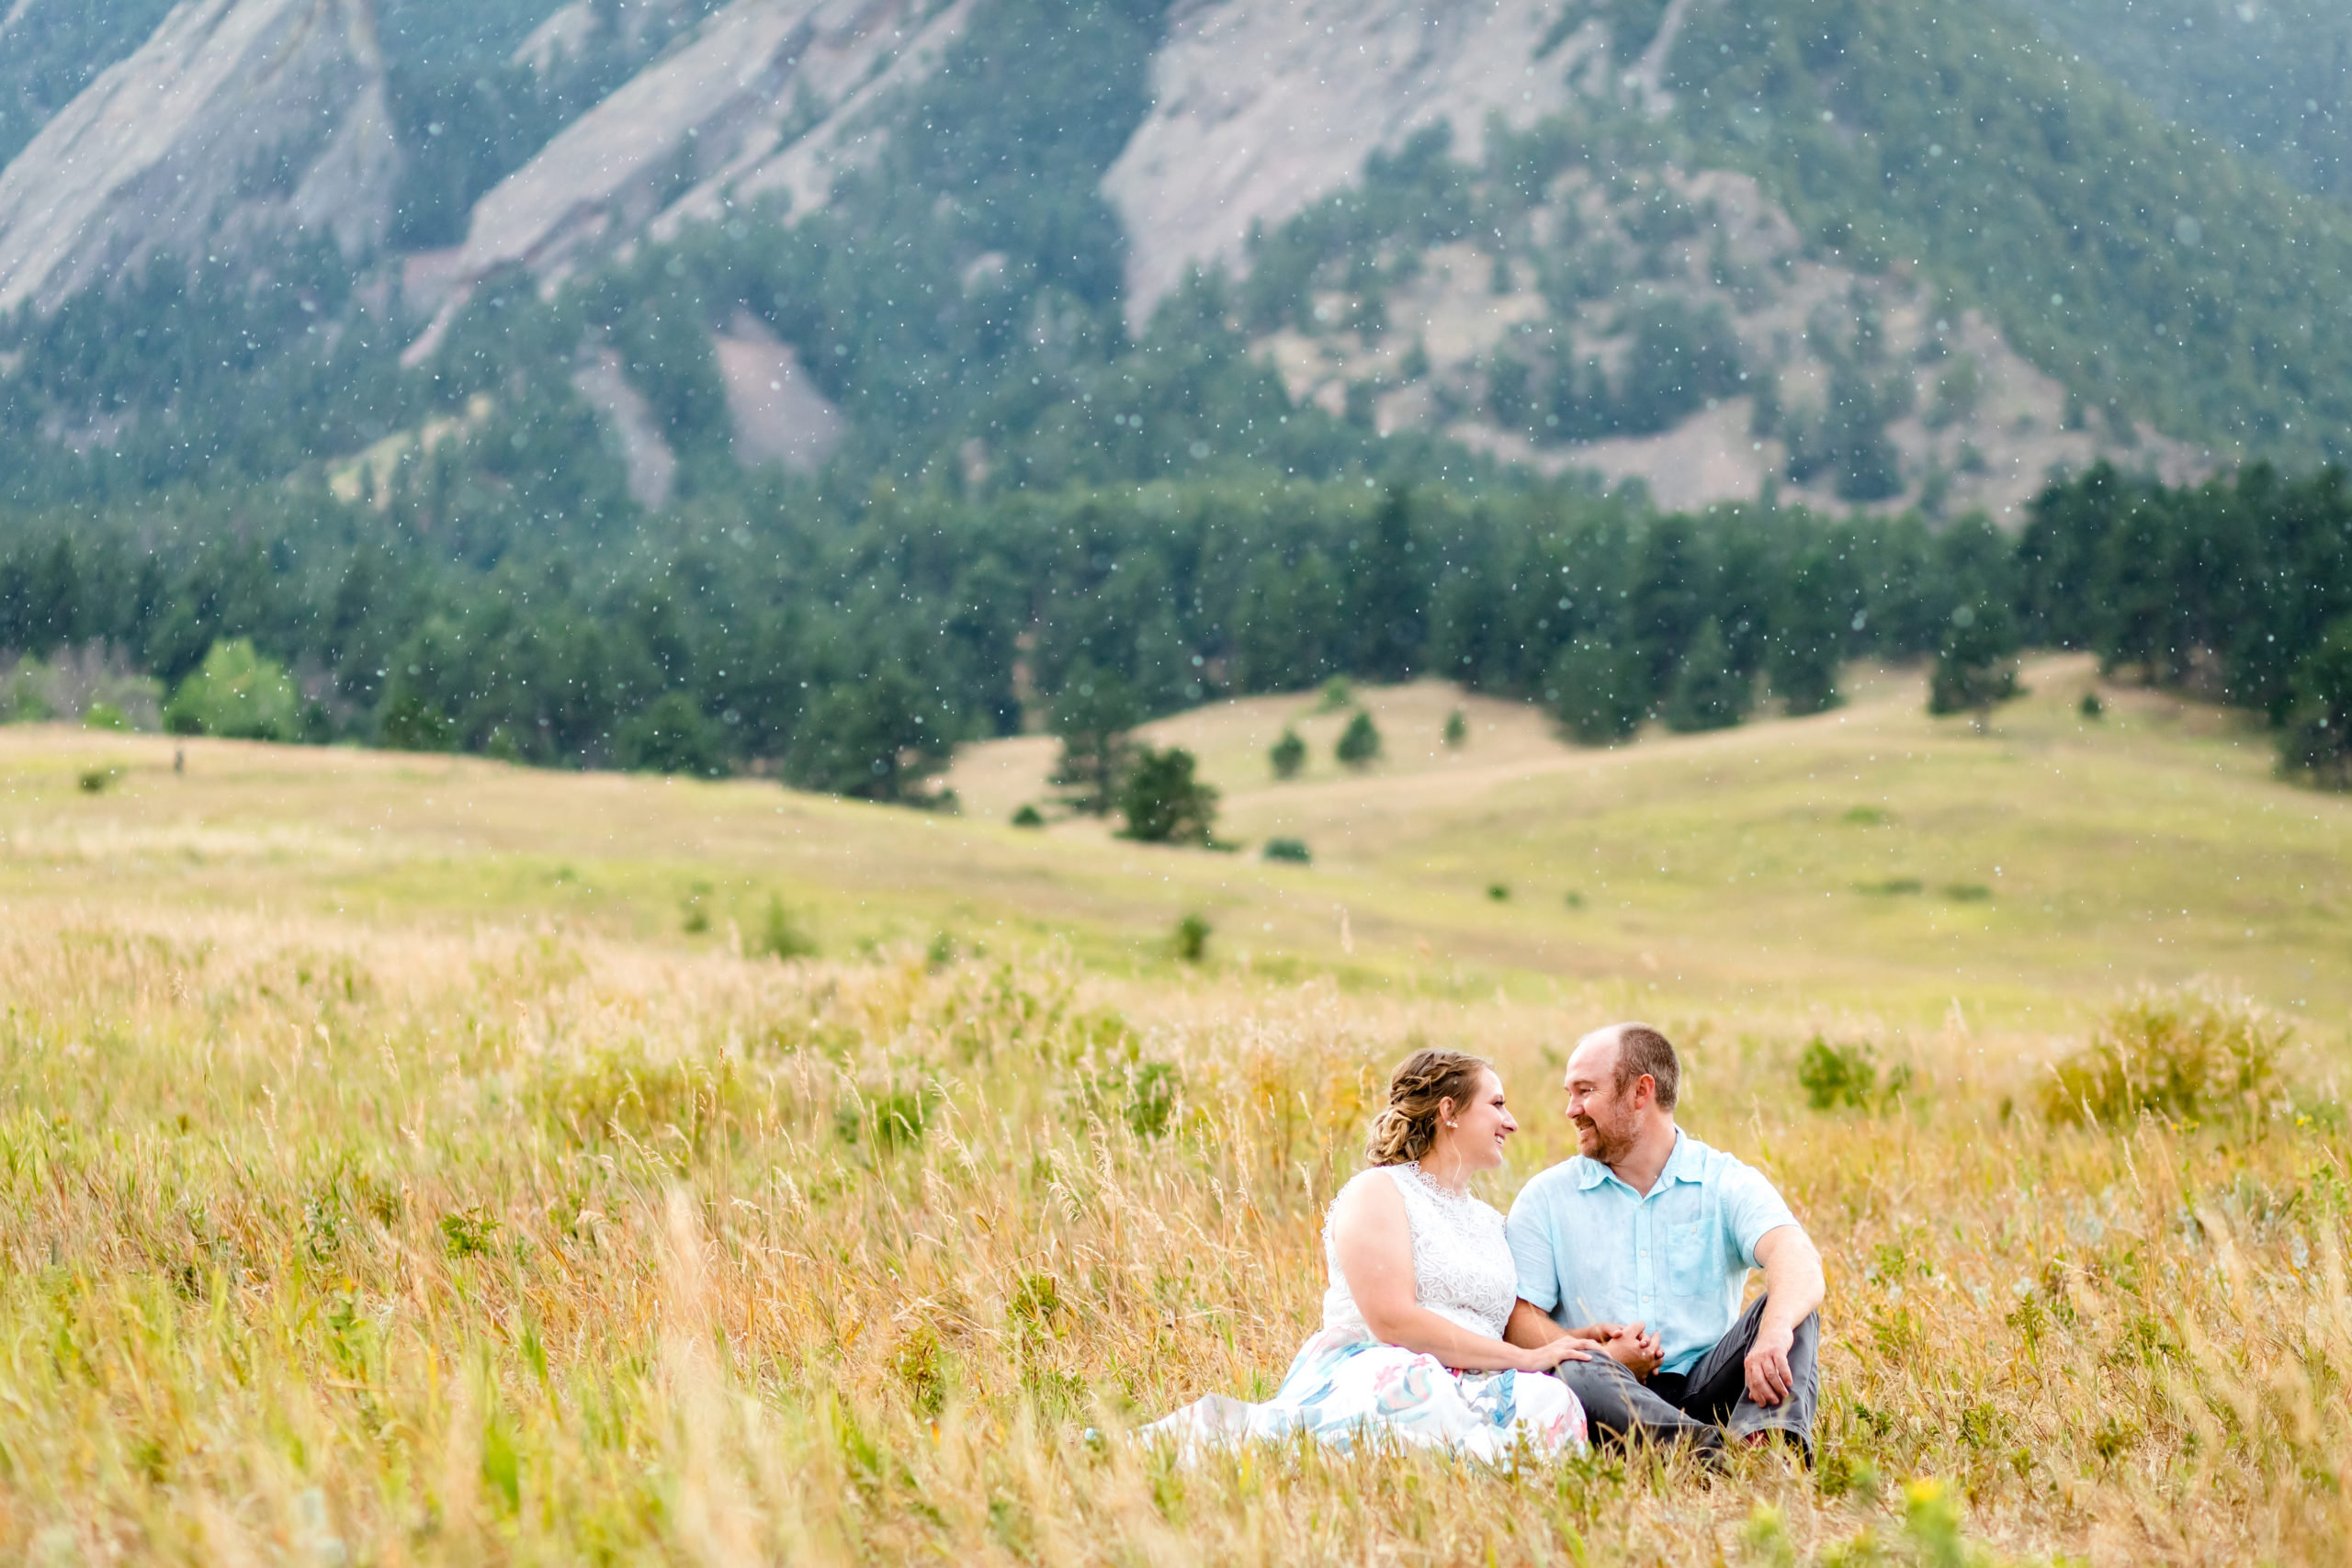 Lauren & Taylor sitting in a field at Chautauqua Park in front of the Colorado Flatirons. Mountain Fall Engagement Session by Colorado Engagement Photographer, Jennifer Garza. Colorado Fall Engagement, Colorado Fall Engagement Photos, Fall Engagement Photography, Fall Engagement Photos, Colorado Engagement Photographer, Colorado Engagement Photography, Mountain Engagement Photographer, Mountain Engagement, Mountain Engagement Photos, Rocky Mountain Bride, Wedding Inspo, Wedding Season, Colorado Wedding, Colorado Bride, Bride to Be, Couples Goals